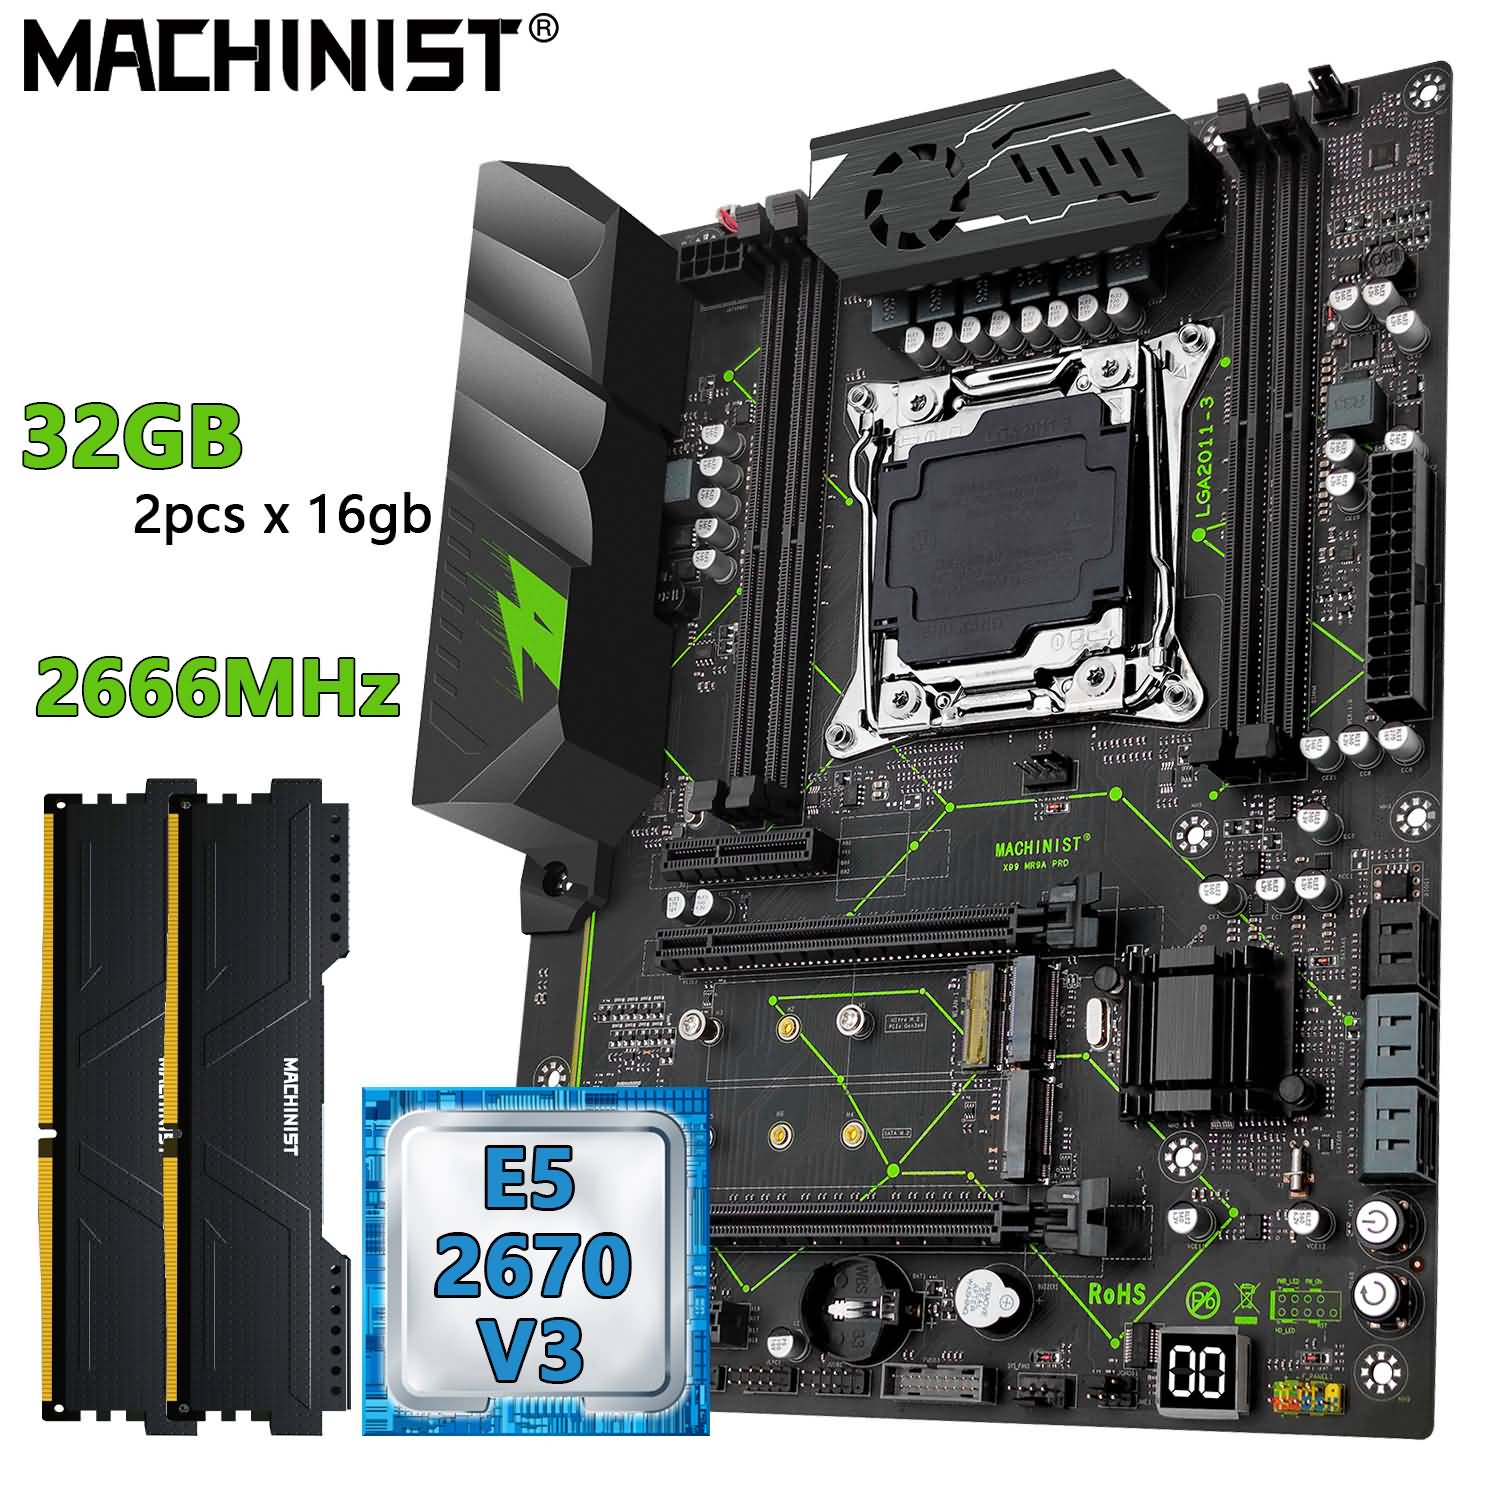 Buy Machinist Kit X99 Motherboard Set With Xeon E5 2670 V3 Cpu And Ddr4